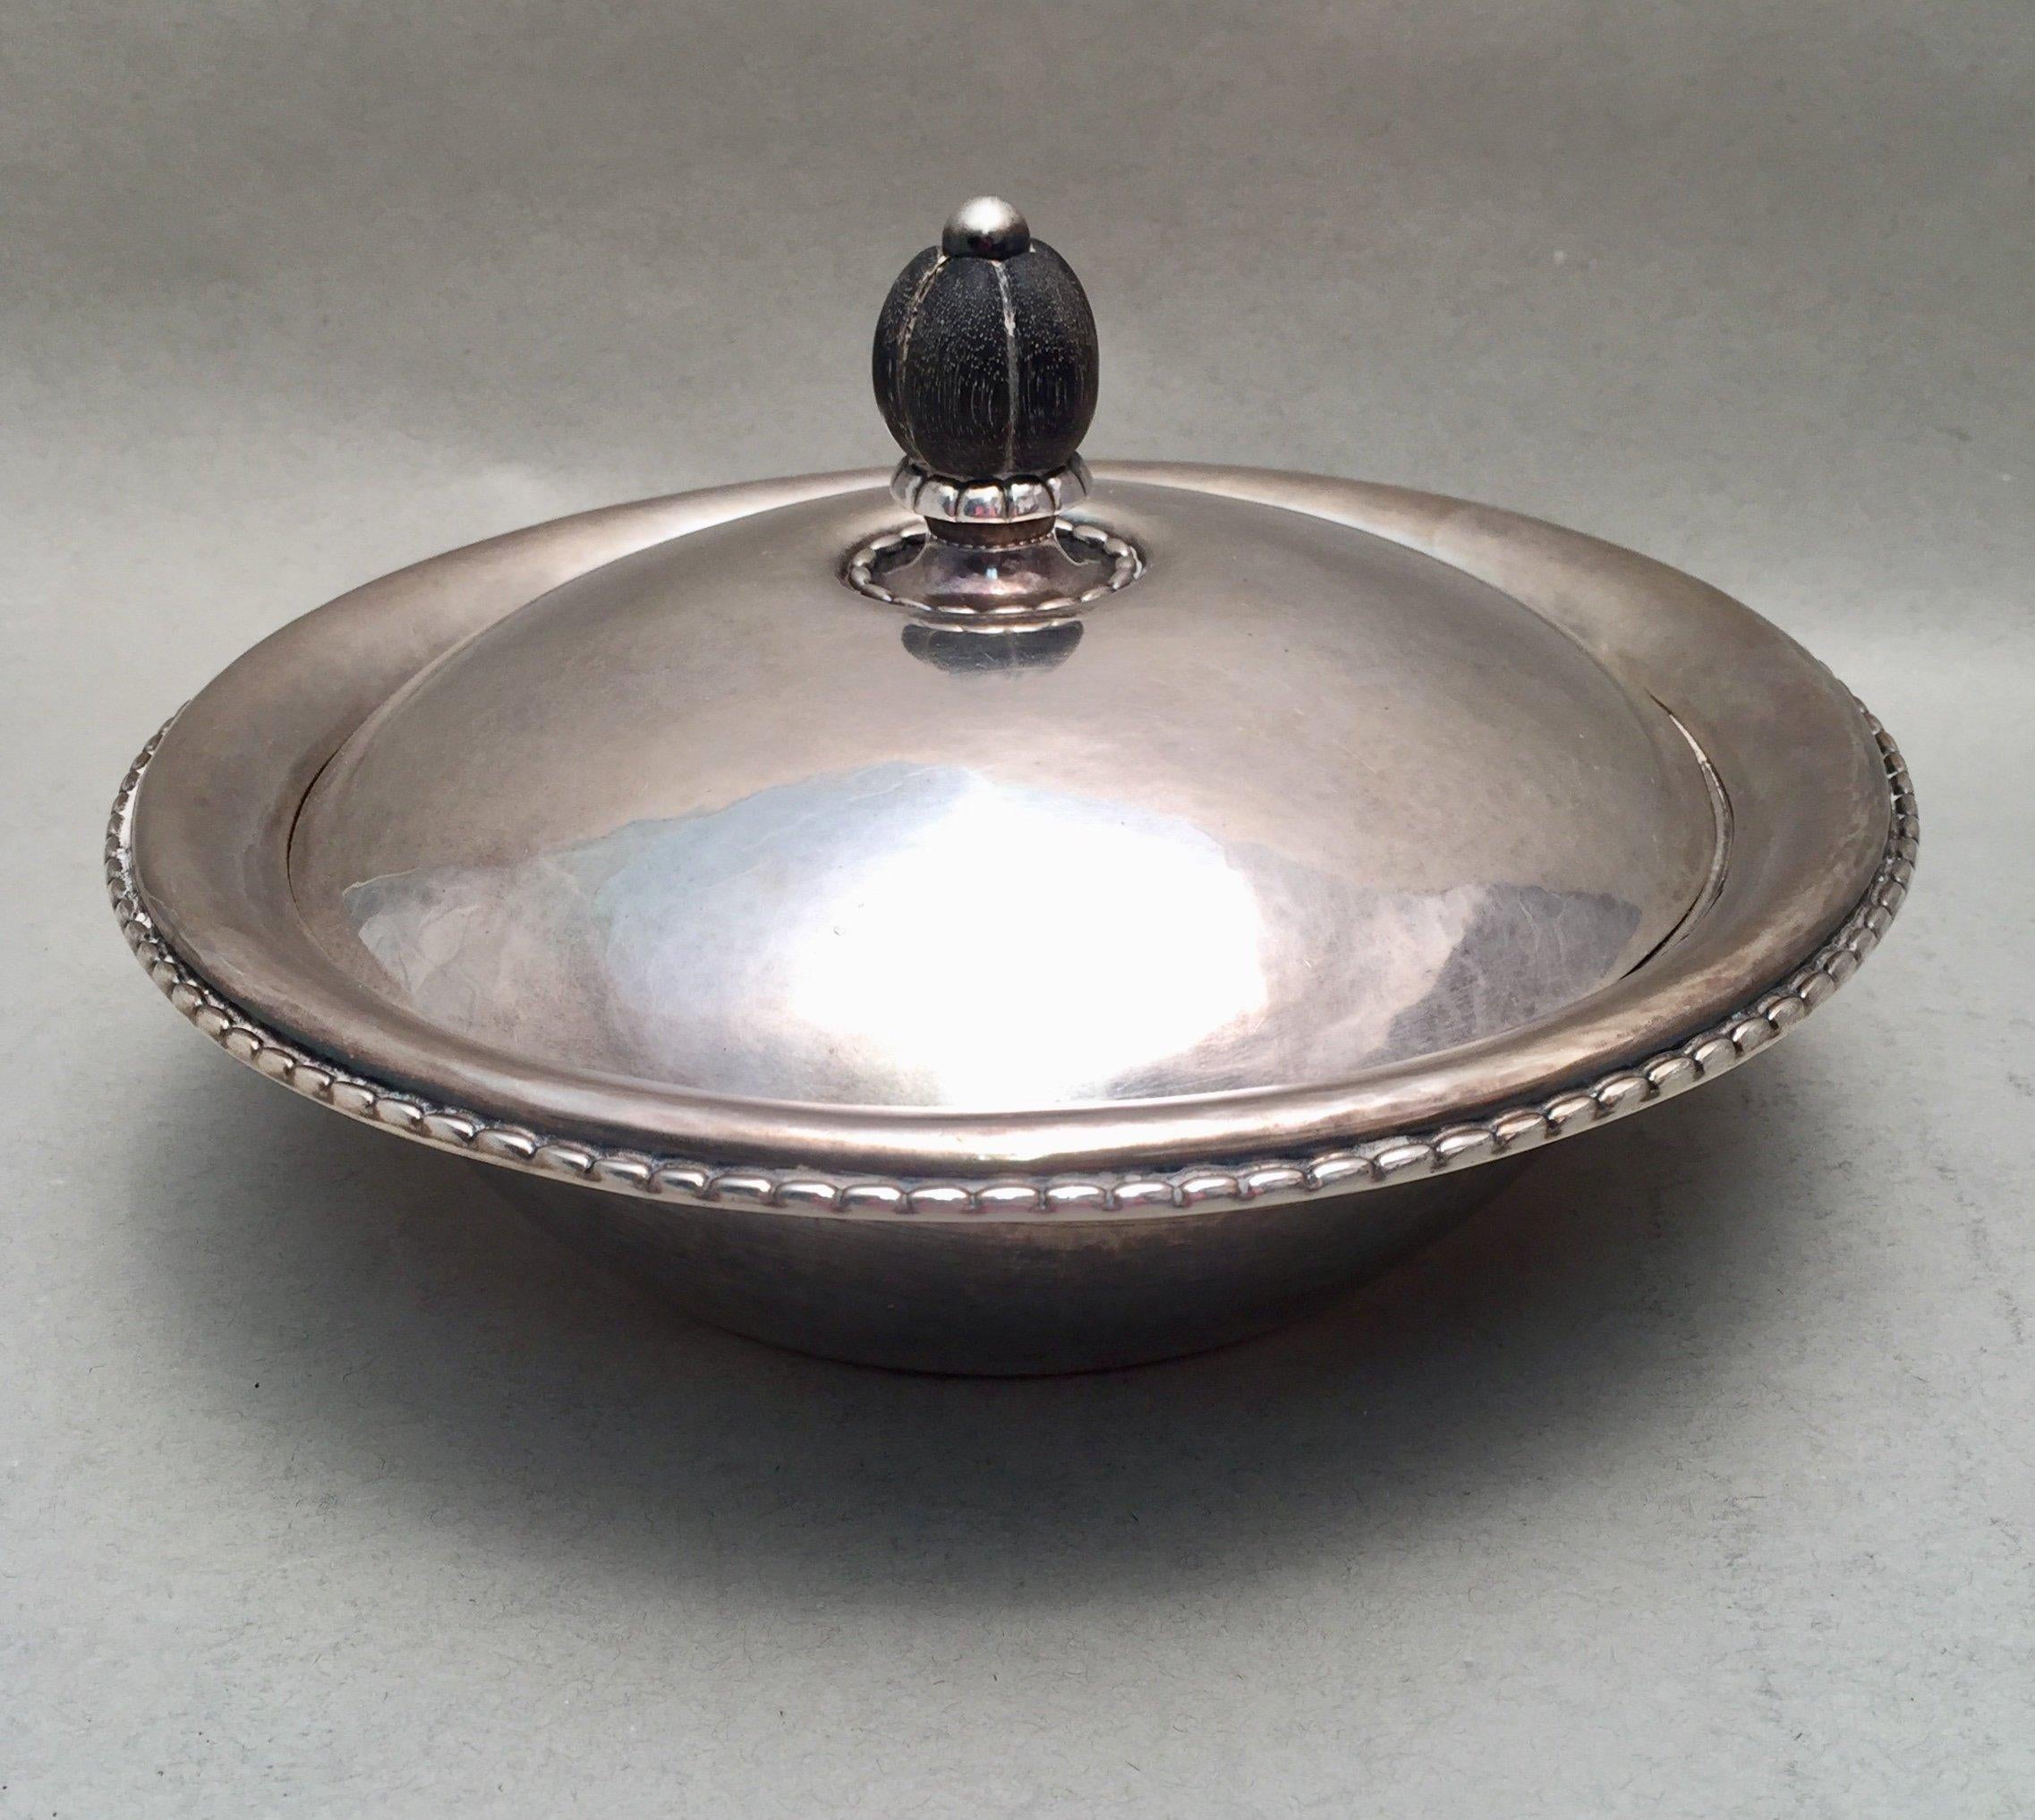 Georg Jensen Danish divided vegetable serving bowl in the blossom pattern. Blossom buds on two sides across from each other. Measuring 12 inches long, 9 inches wide, and 2 3/4 inches tall. Weighing 36.9 troy ounces. Bearing hallmarks as shown.